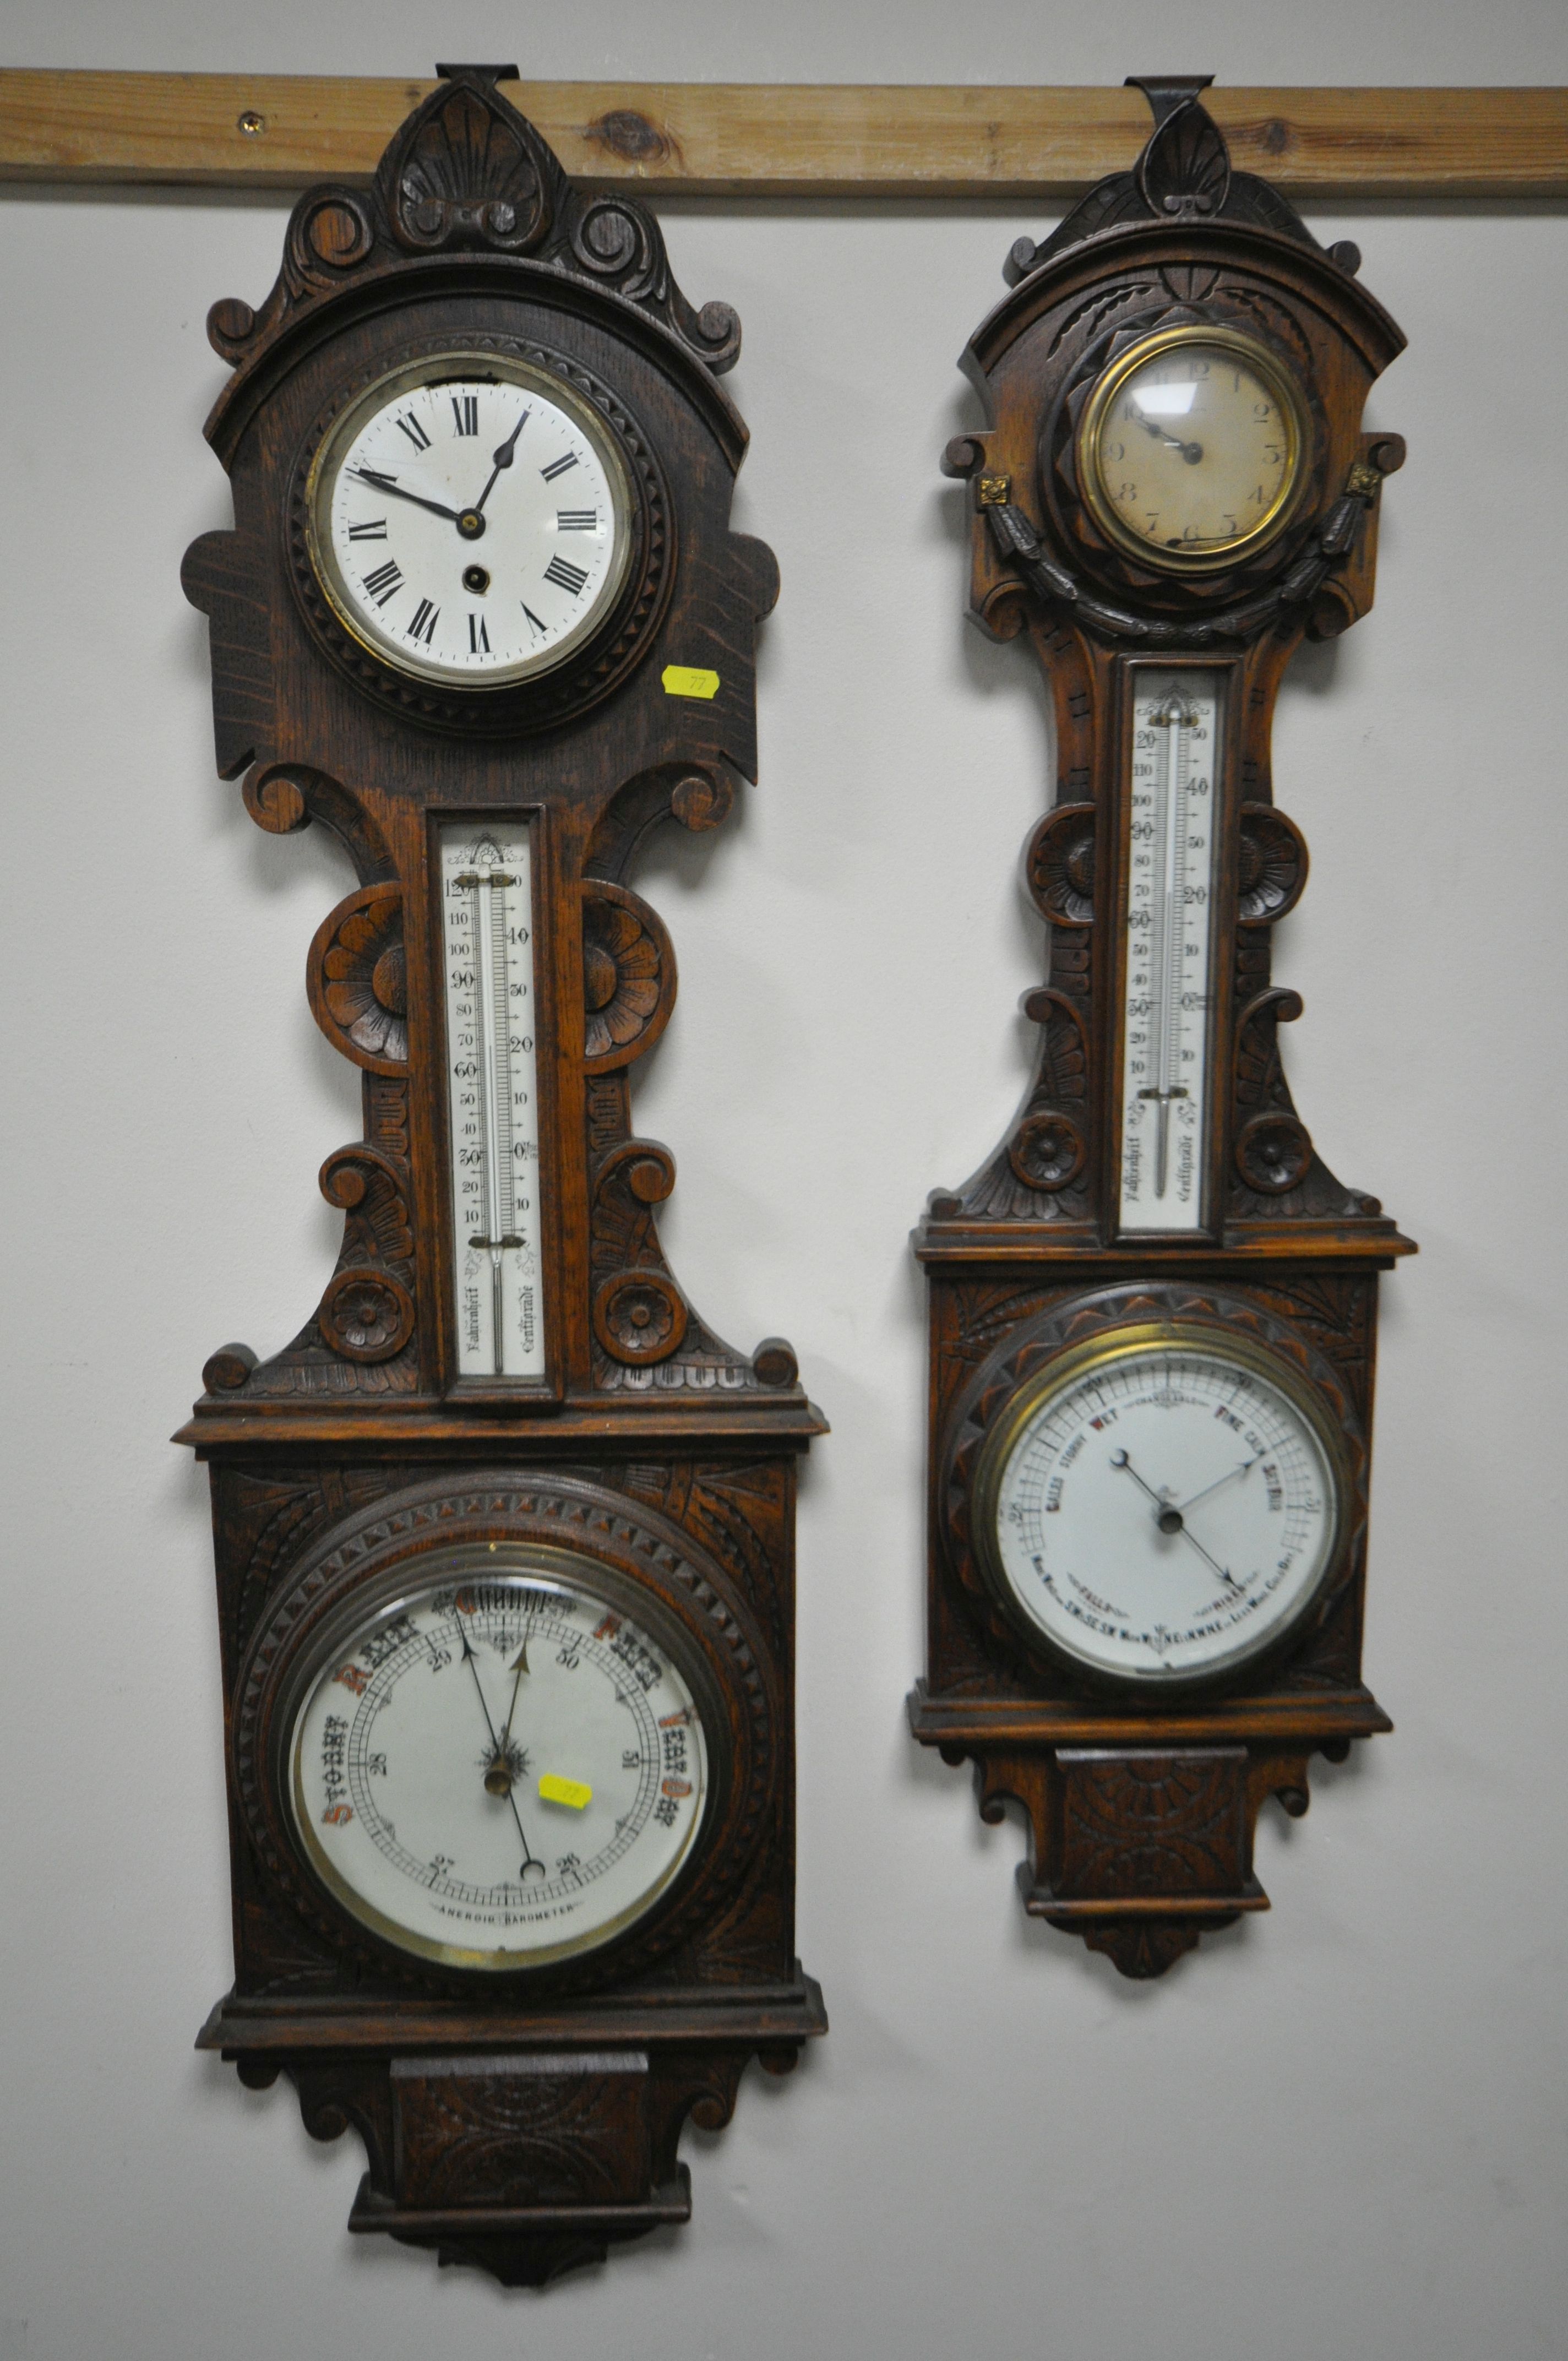 TWO LATE 19TH/EARLY 20TH CENTURY CARVED OAK ANEROID BAROMETERS, with clock dials and thermometers,